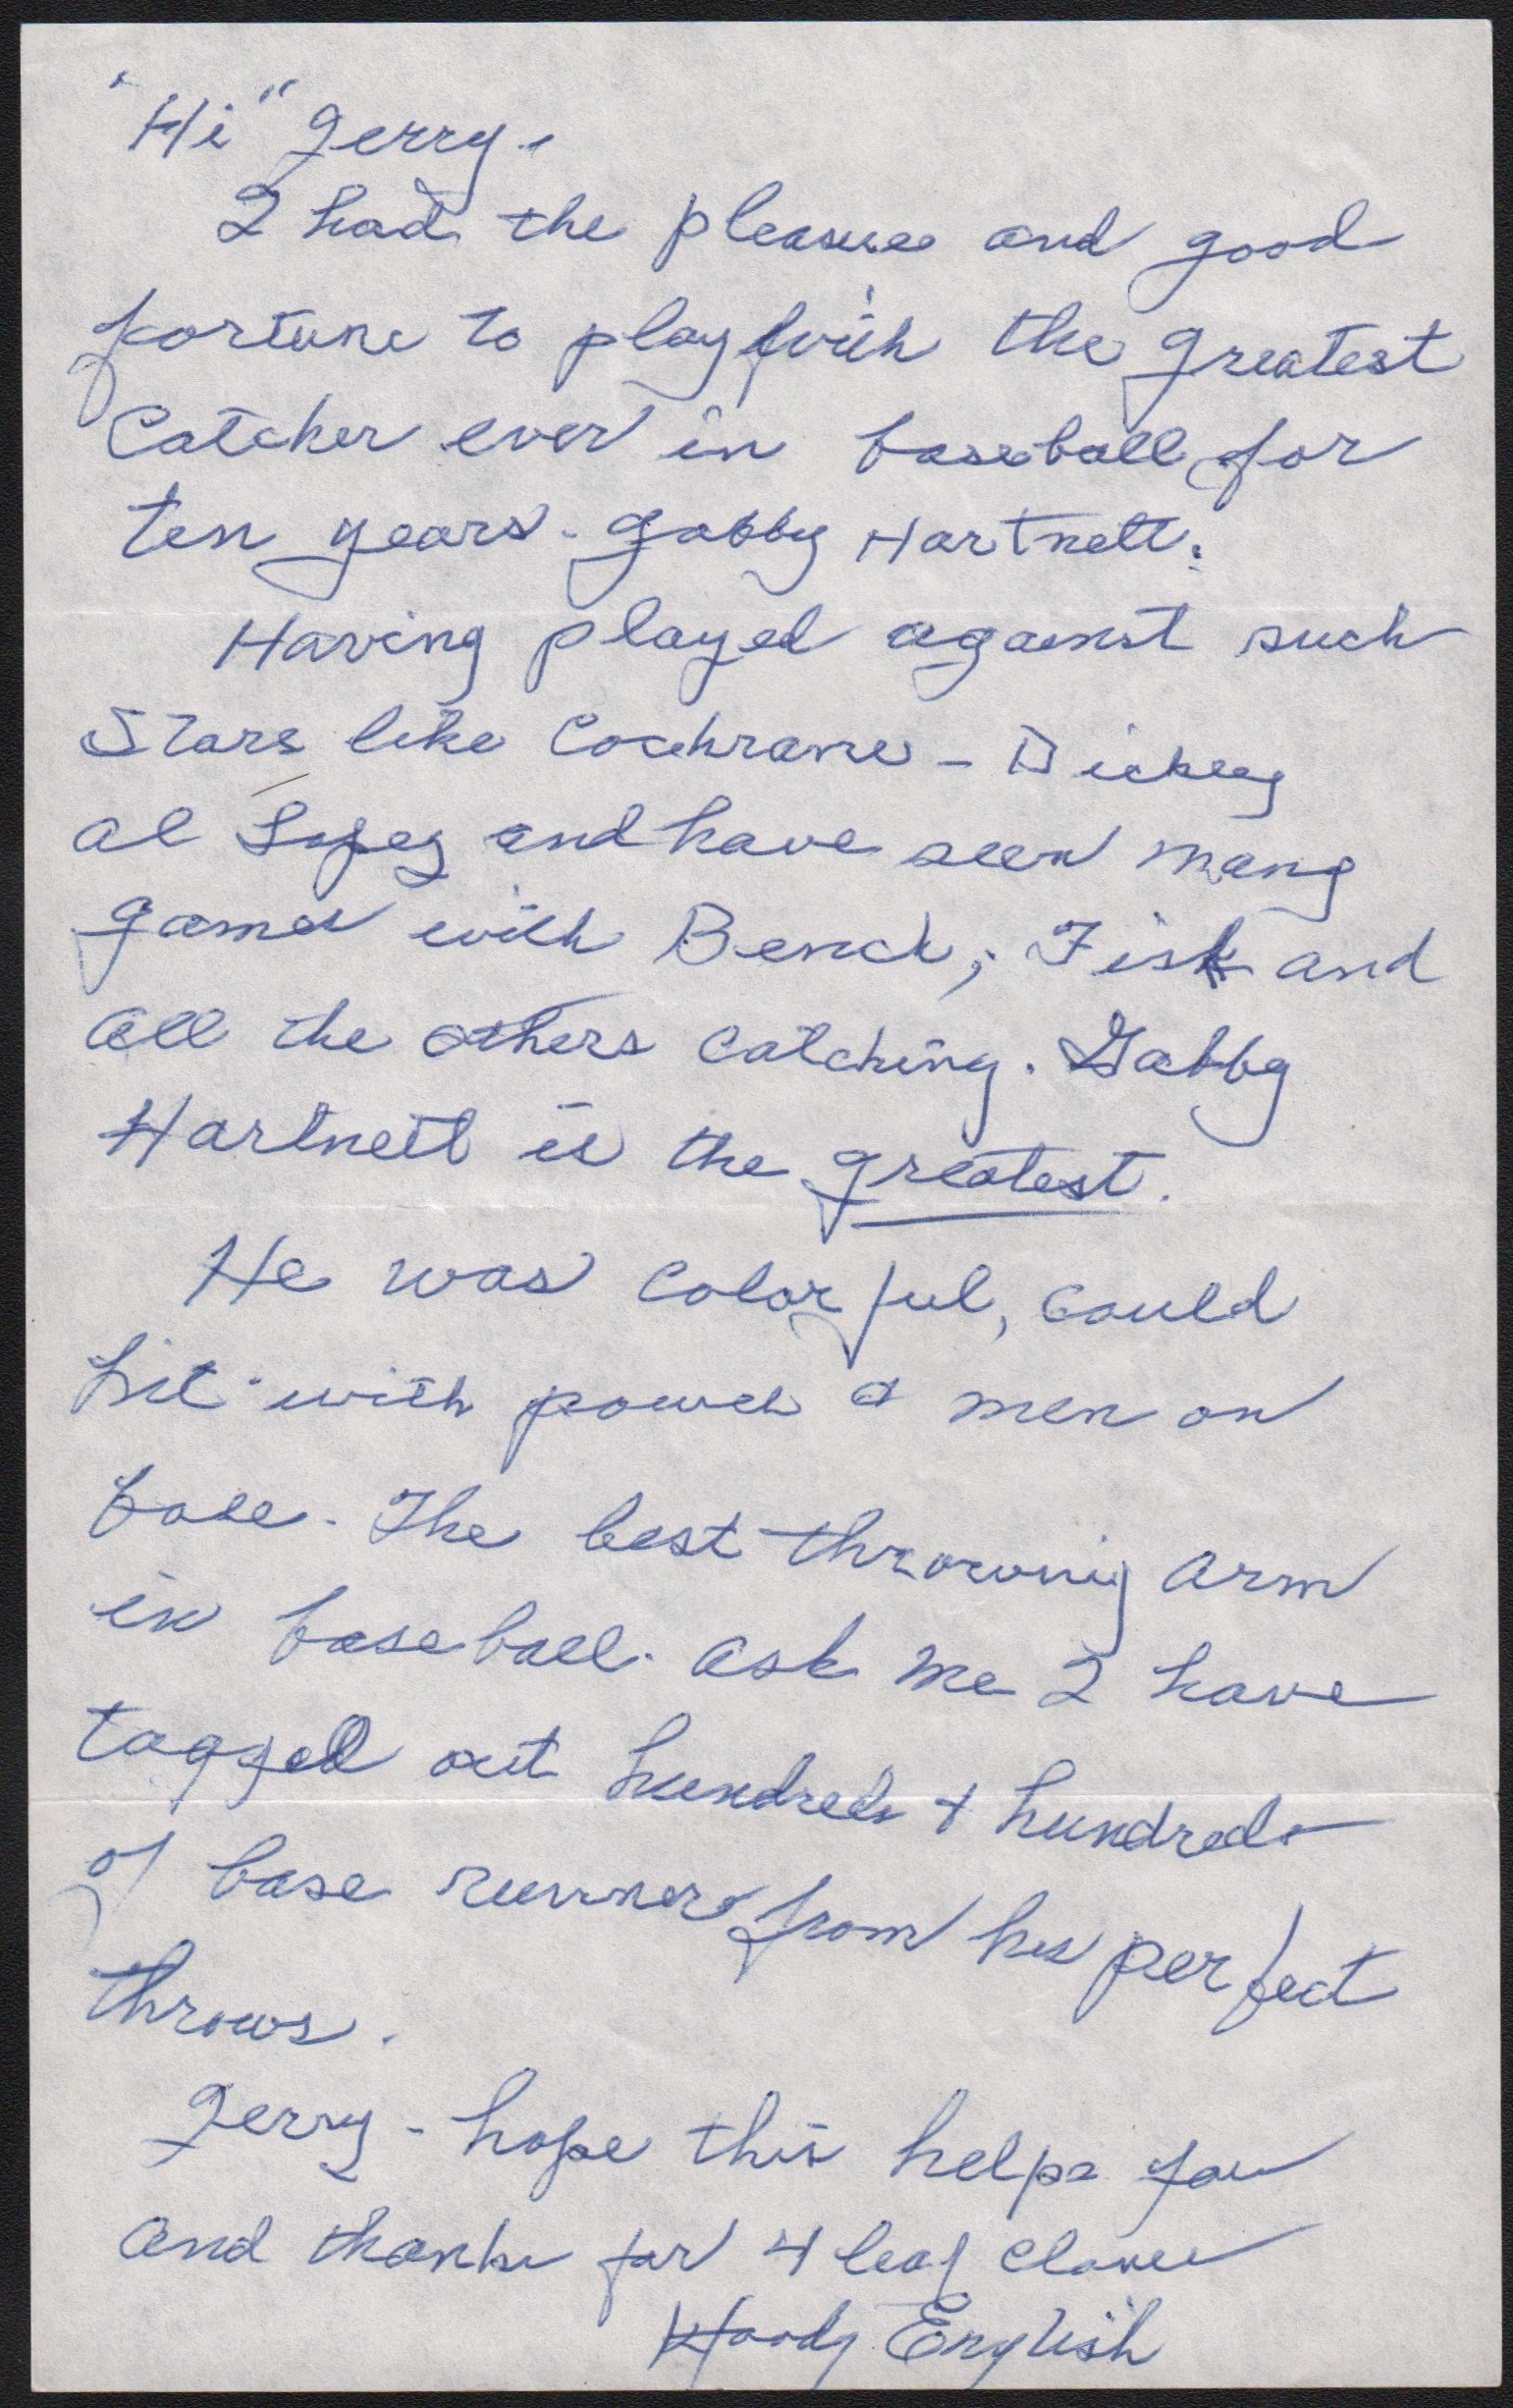 Baseball Autographs - Woody English Hand Written Letter w/ "Greatest Catchers" Content